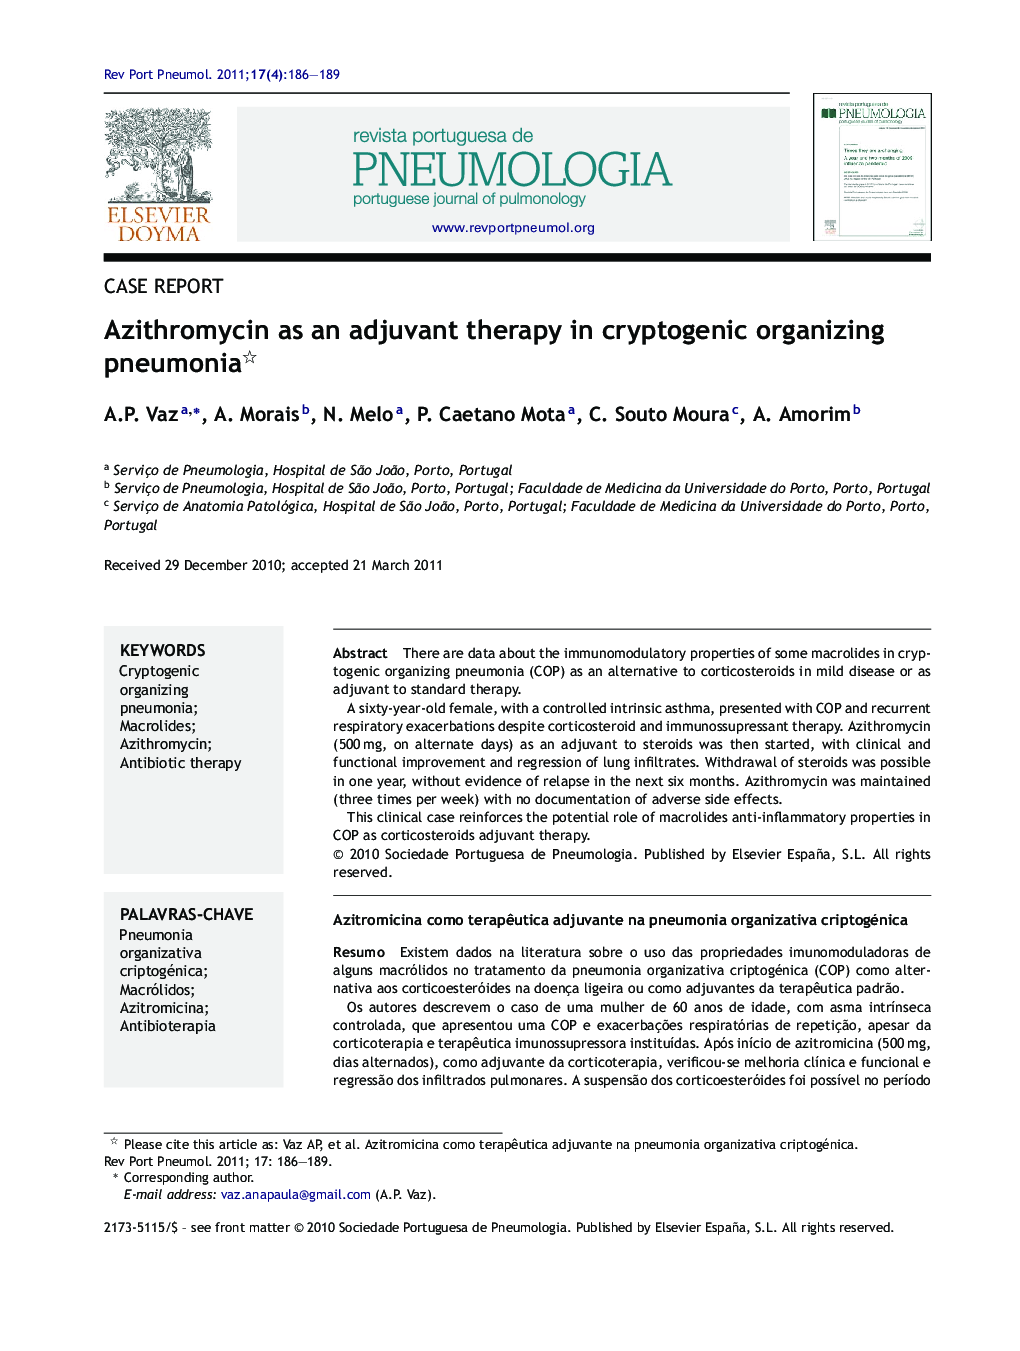 Azithromycin as an adjuvant therapy in cryptogenic organizing pneumonia